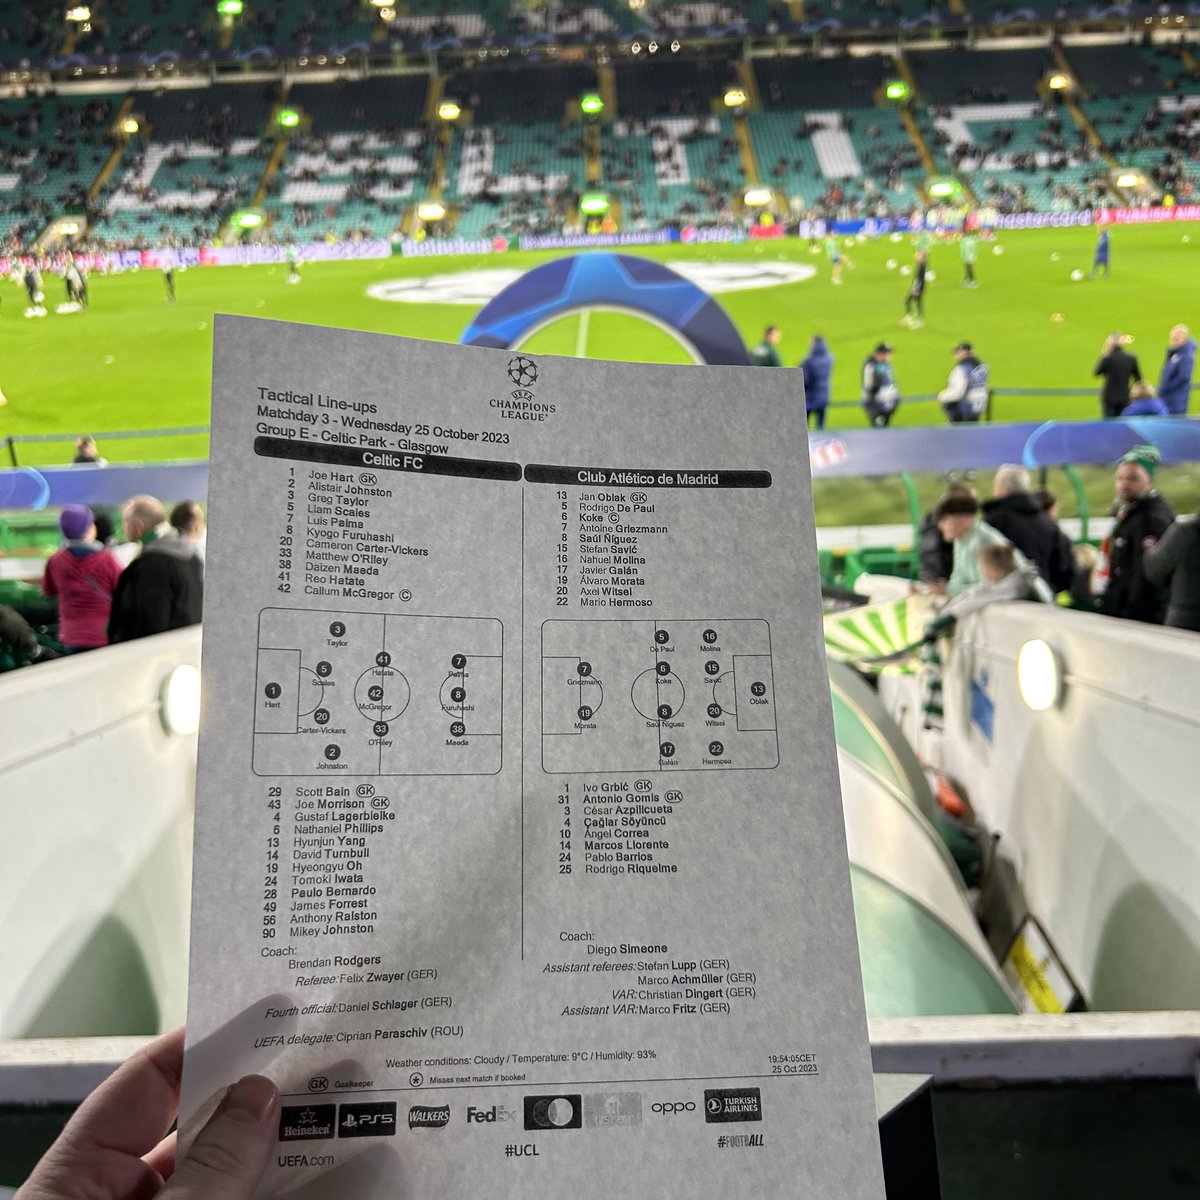 Back on commentary for Champions League action at Celtic Park tonight. Always a pleasure 🍀